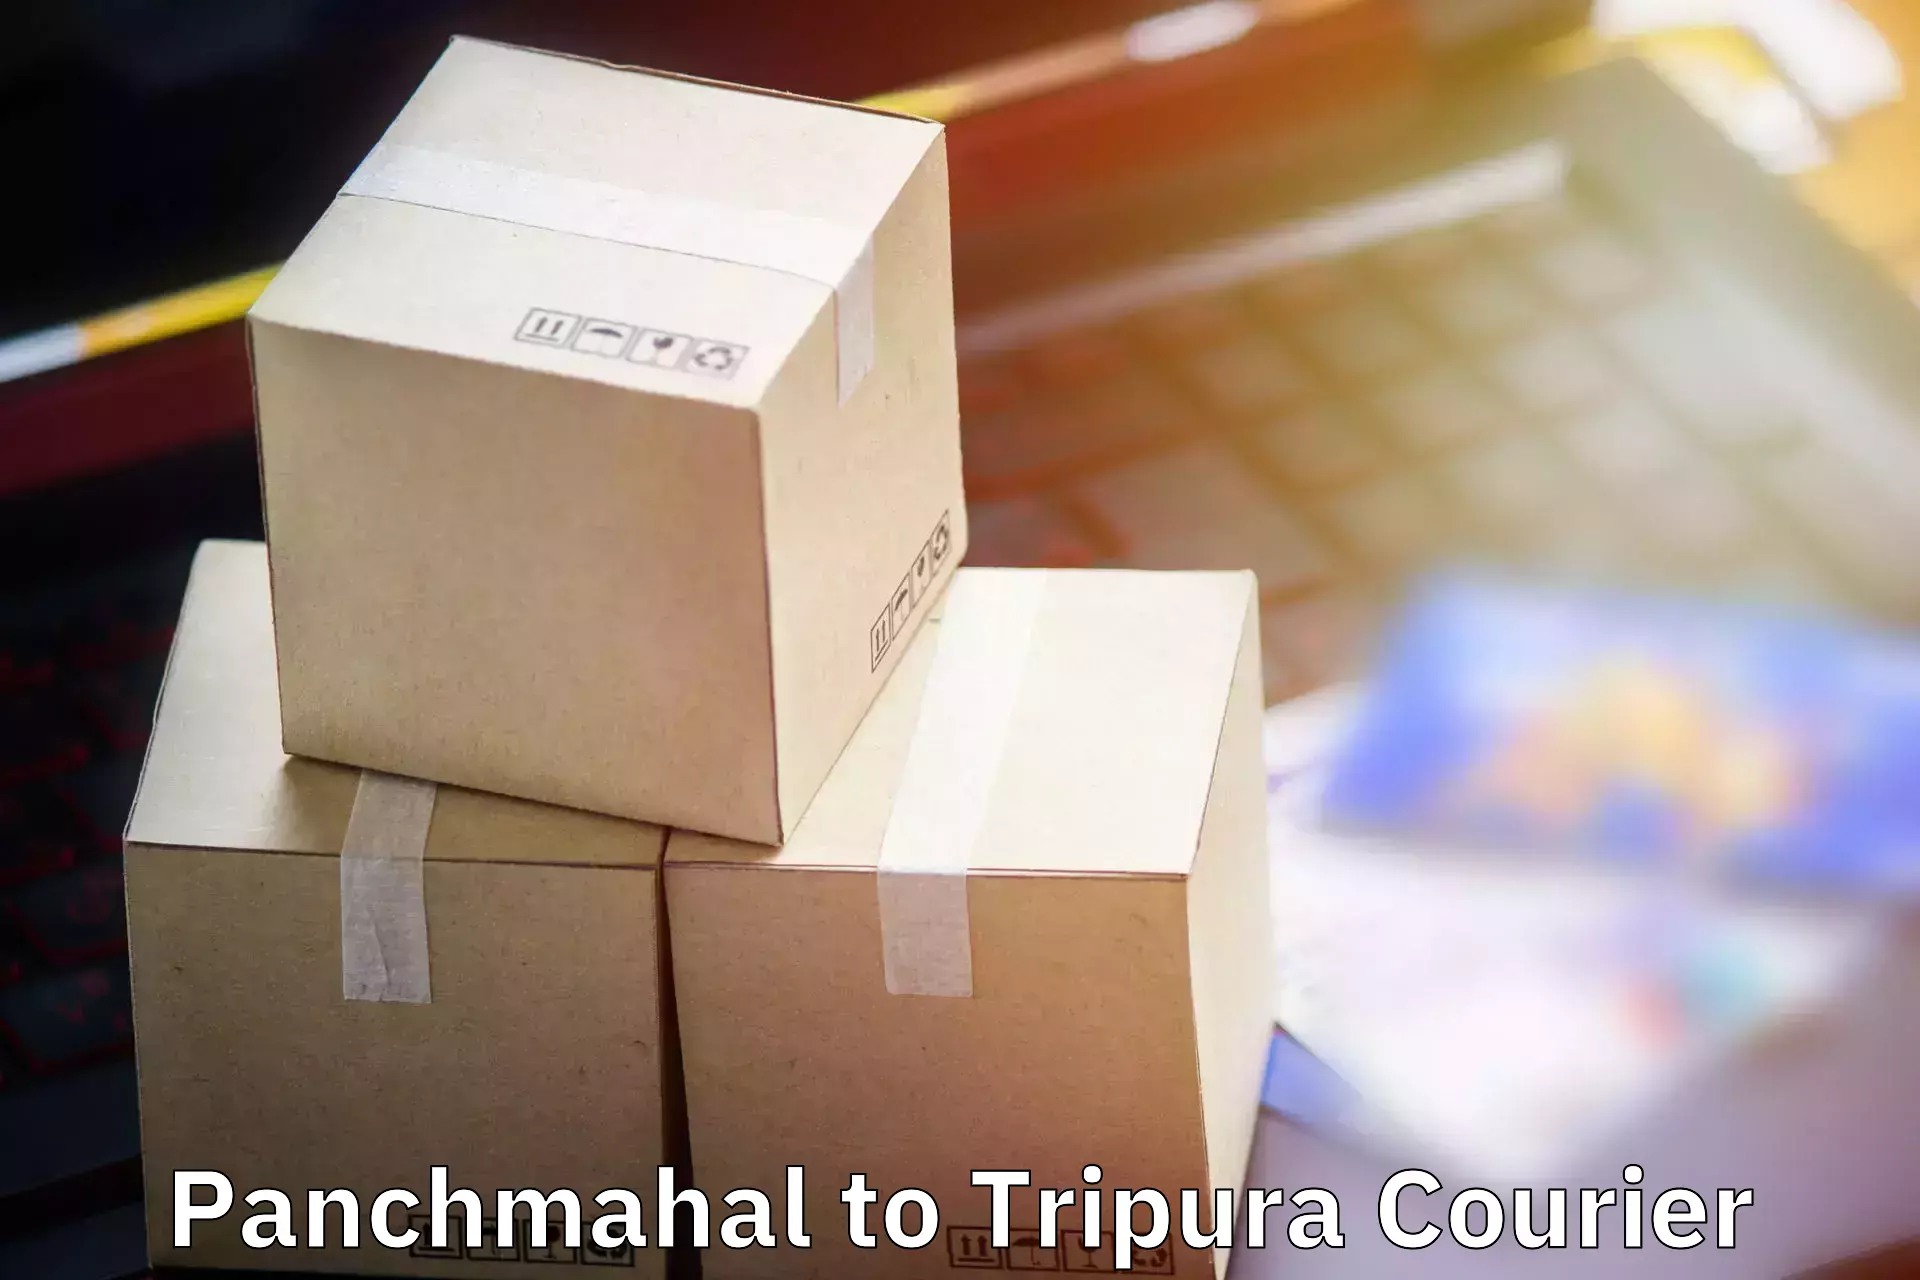 Baggage shipping schedule Panchmahal to Udaipur Tripura